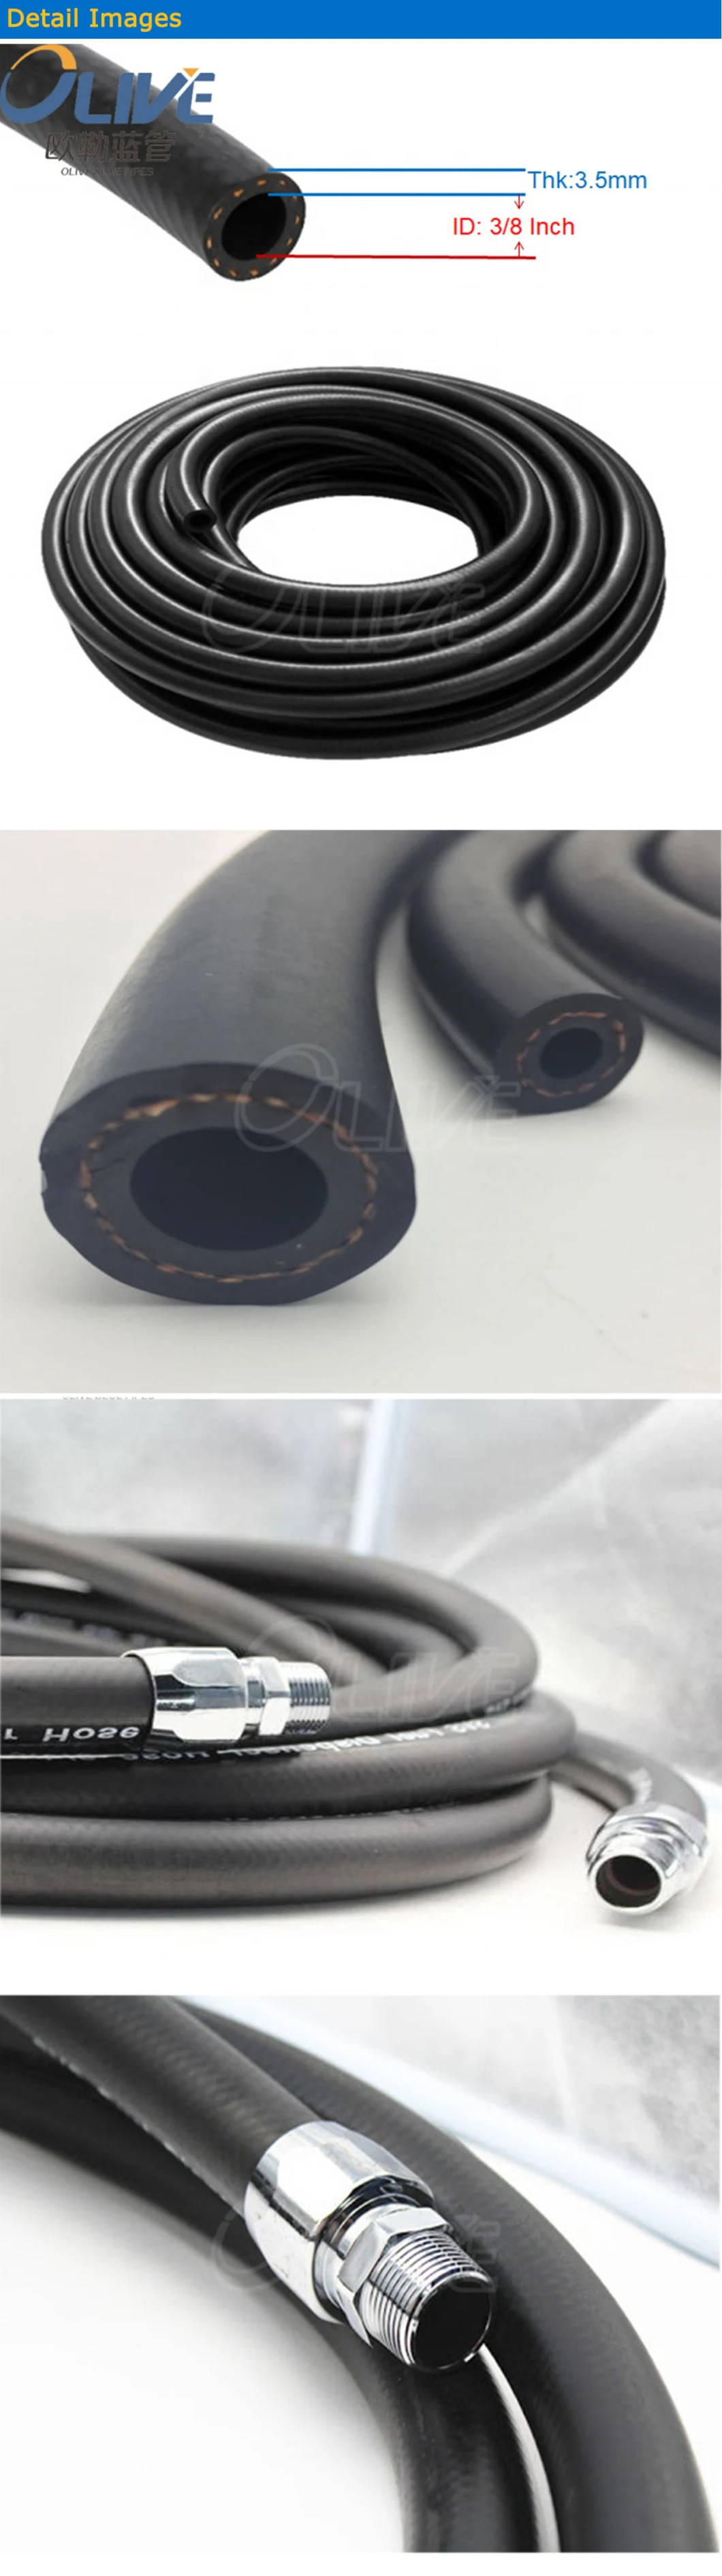 1 Inch Thin Rubber Irrigation Water Hose Pipe Manufacturers 3/8